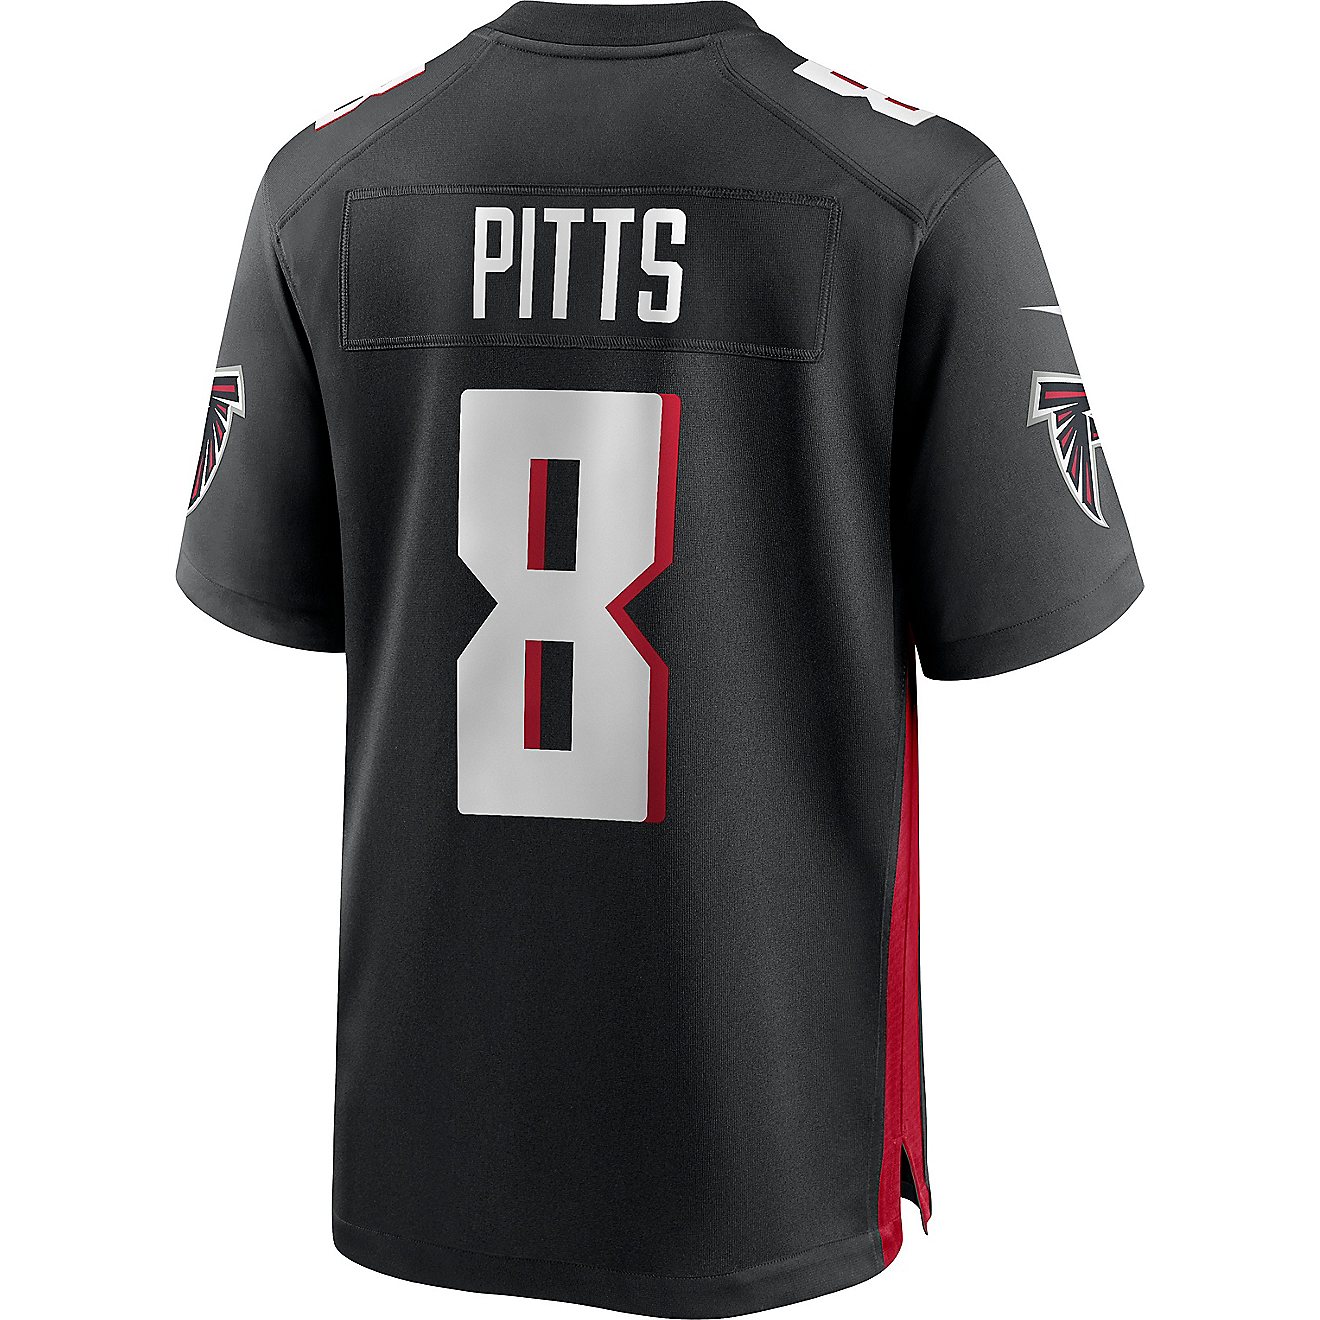 Nike Men's Atlanta Falcons Pitts Home Game Player Jersey                                                                         - view number 1